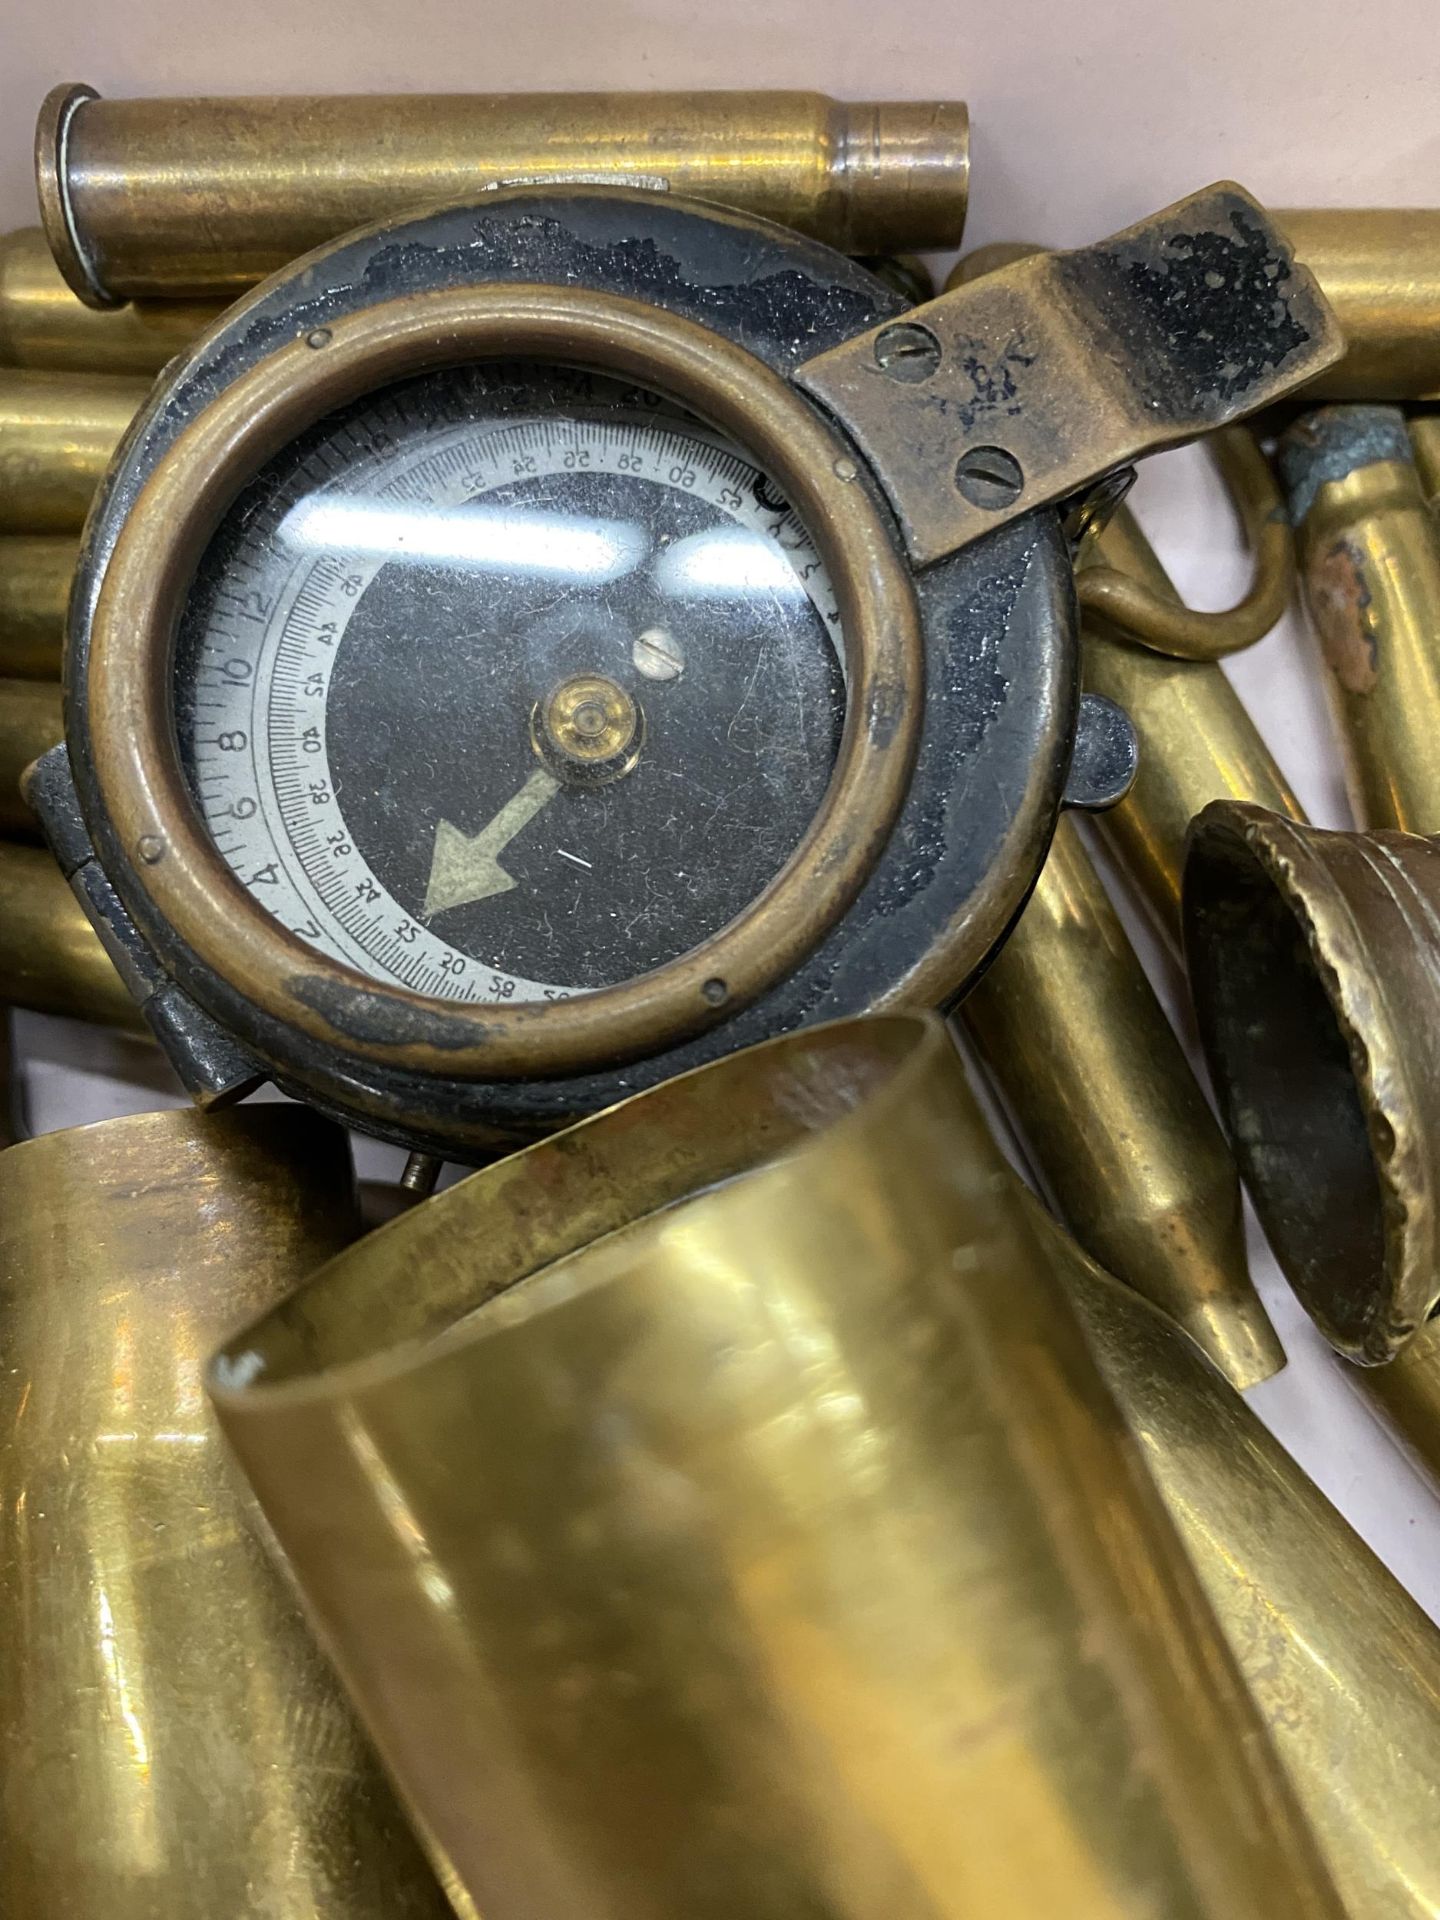 A QUANTITY OF BRASS MILITARIA BULLET SHELLS - Image 3 of 4